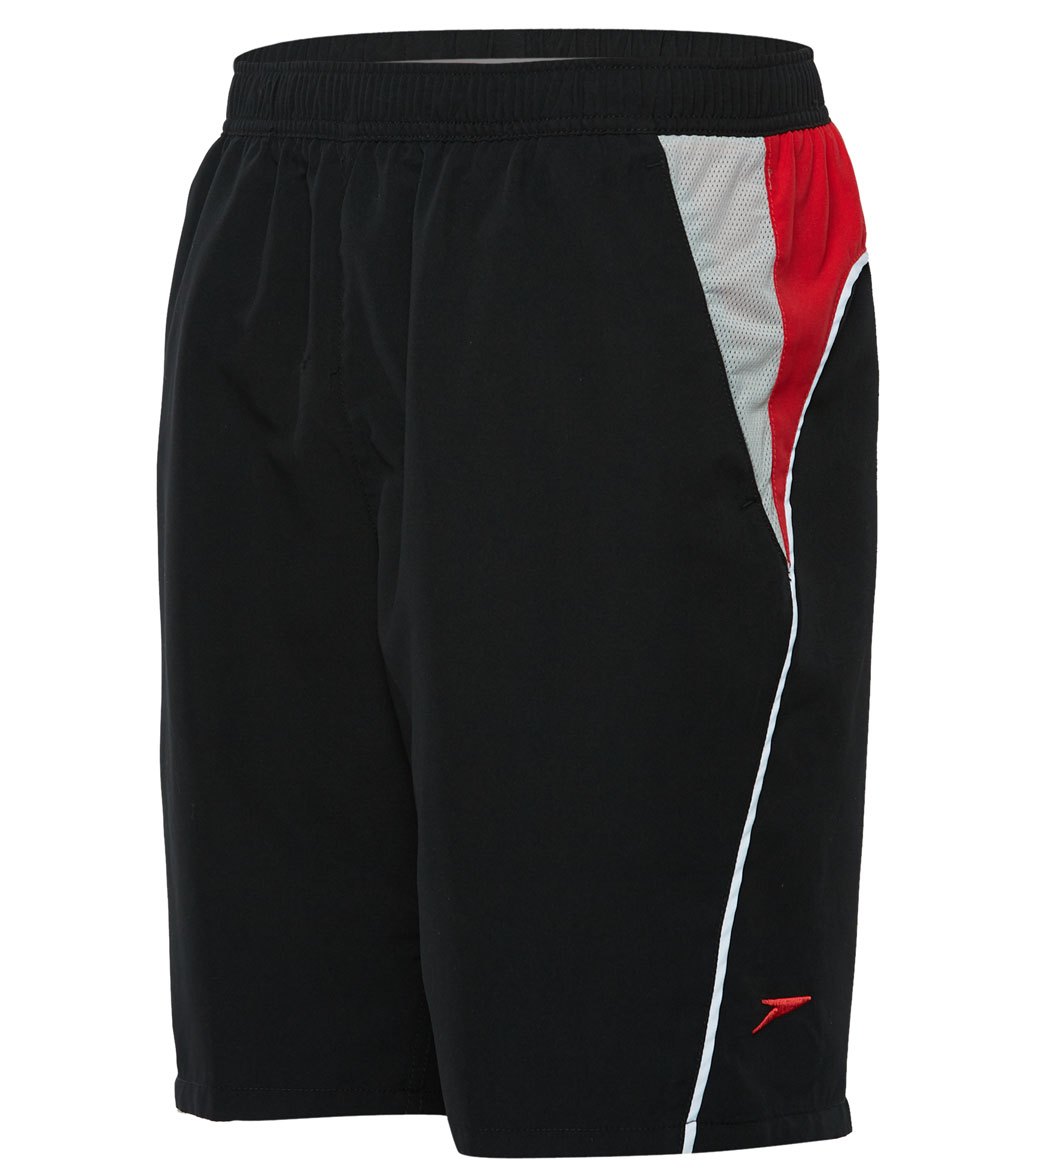 Speedo Men's 20 Cutback Volley Water Short - Black/Red/White Small Polyester - Swimoutlet.com